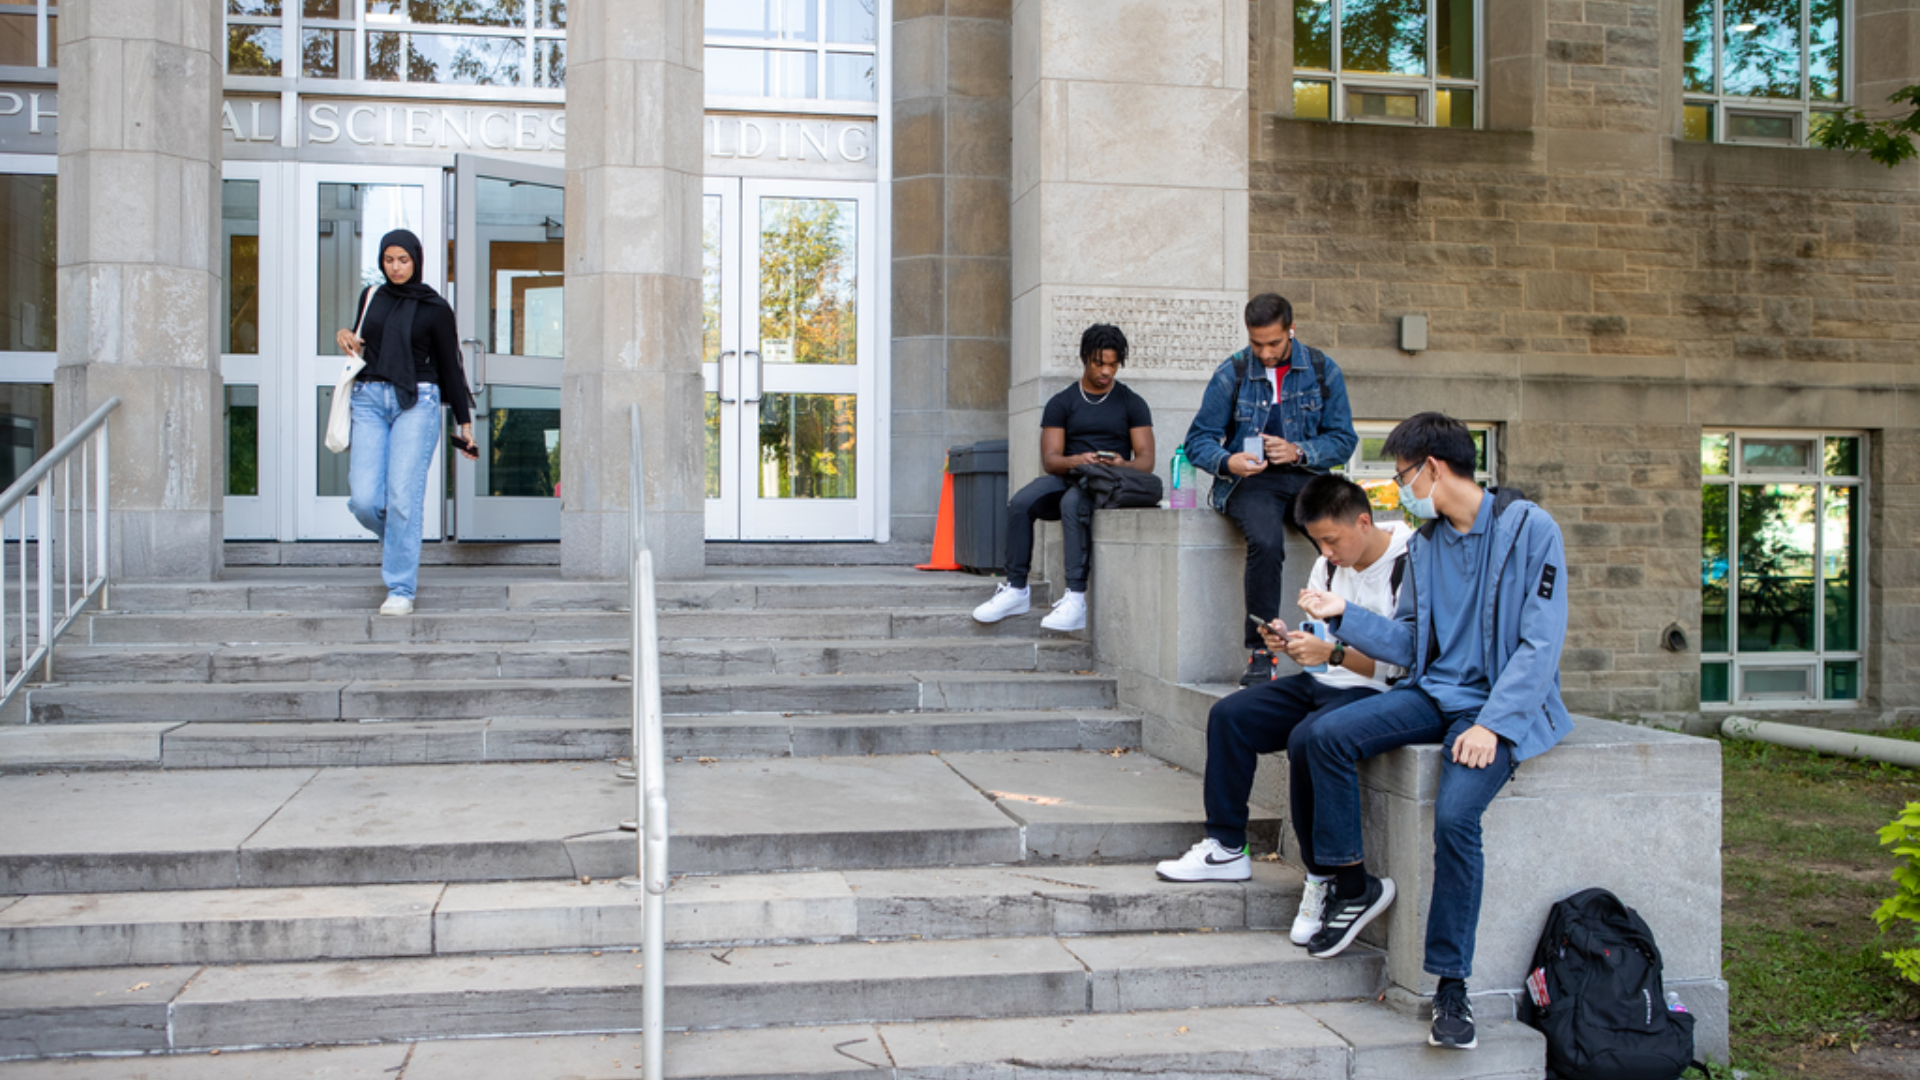 Four students seated looking at their phones as they sit outside the Burke Science Building. Another student is walking down the stairs to the building's entrance